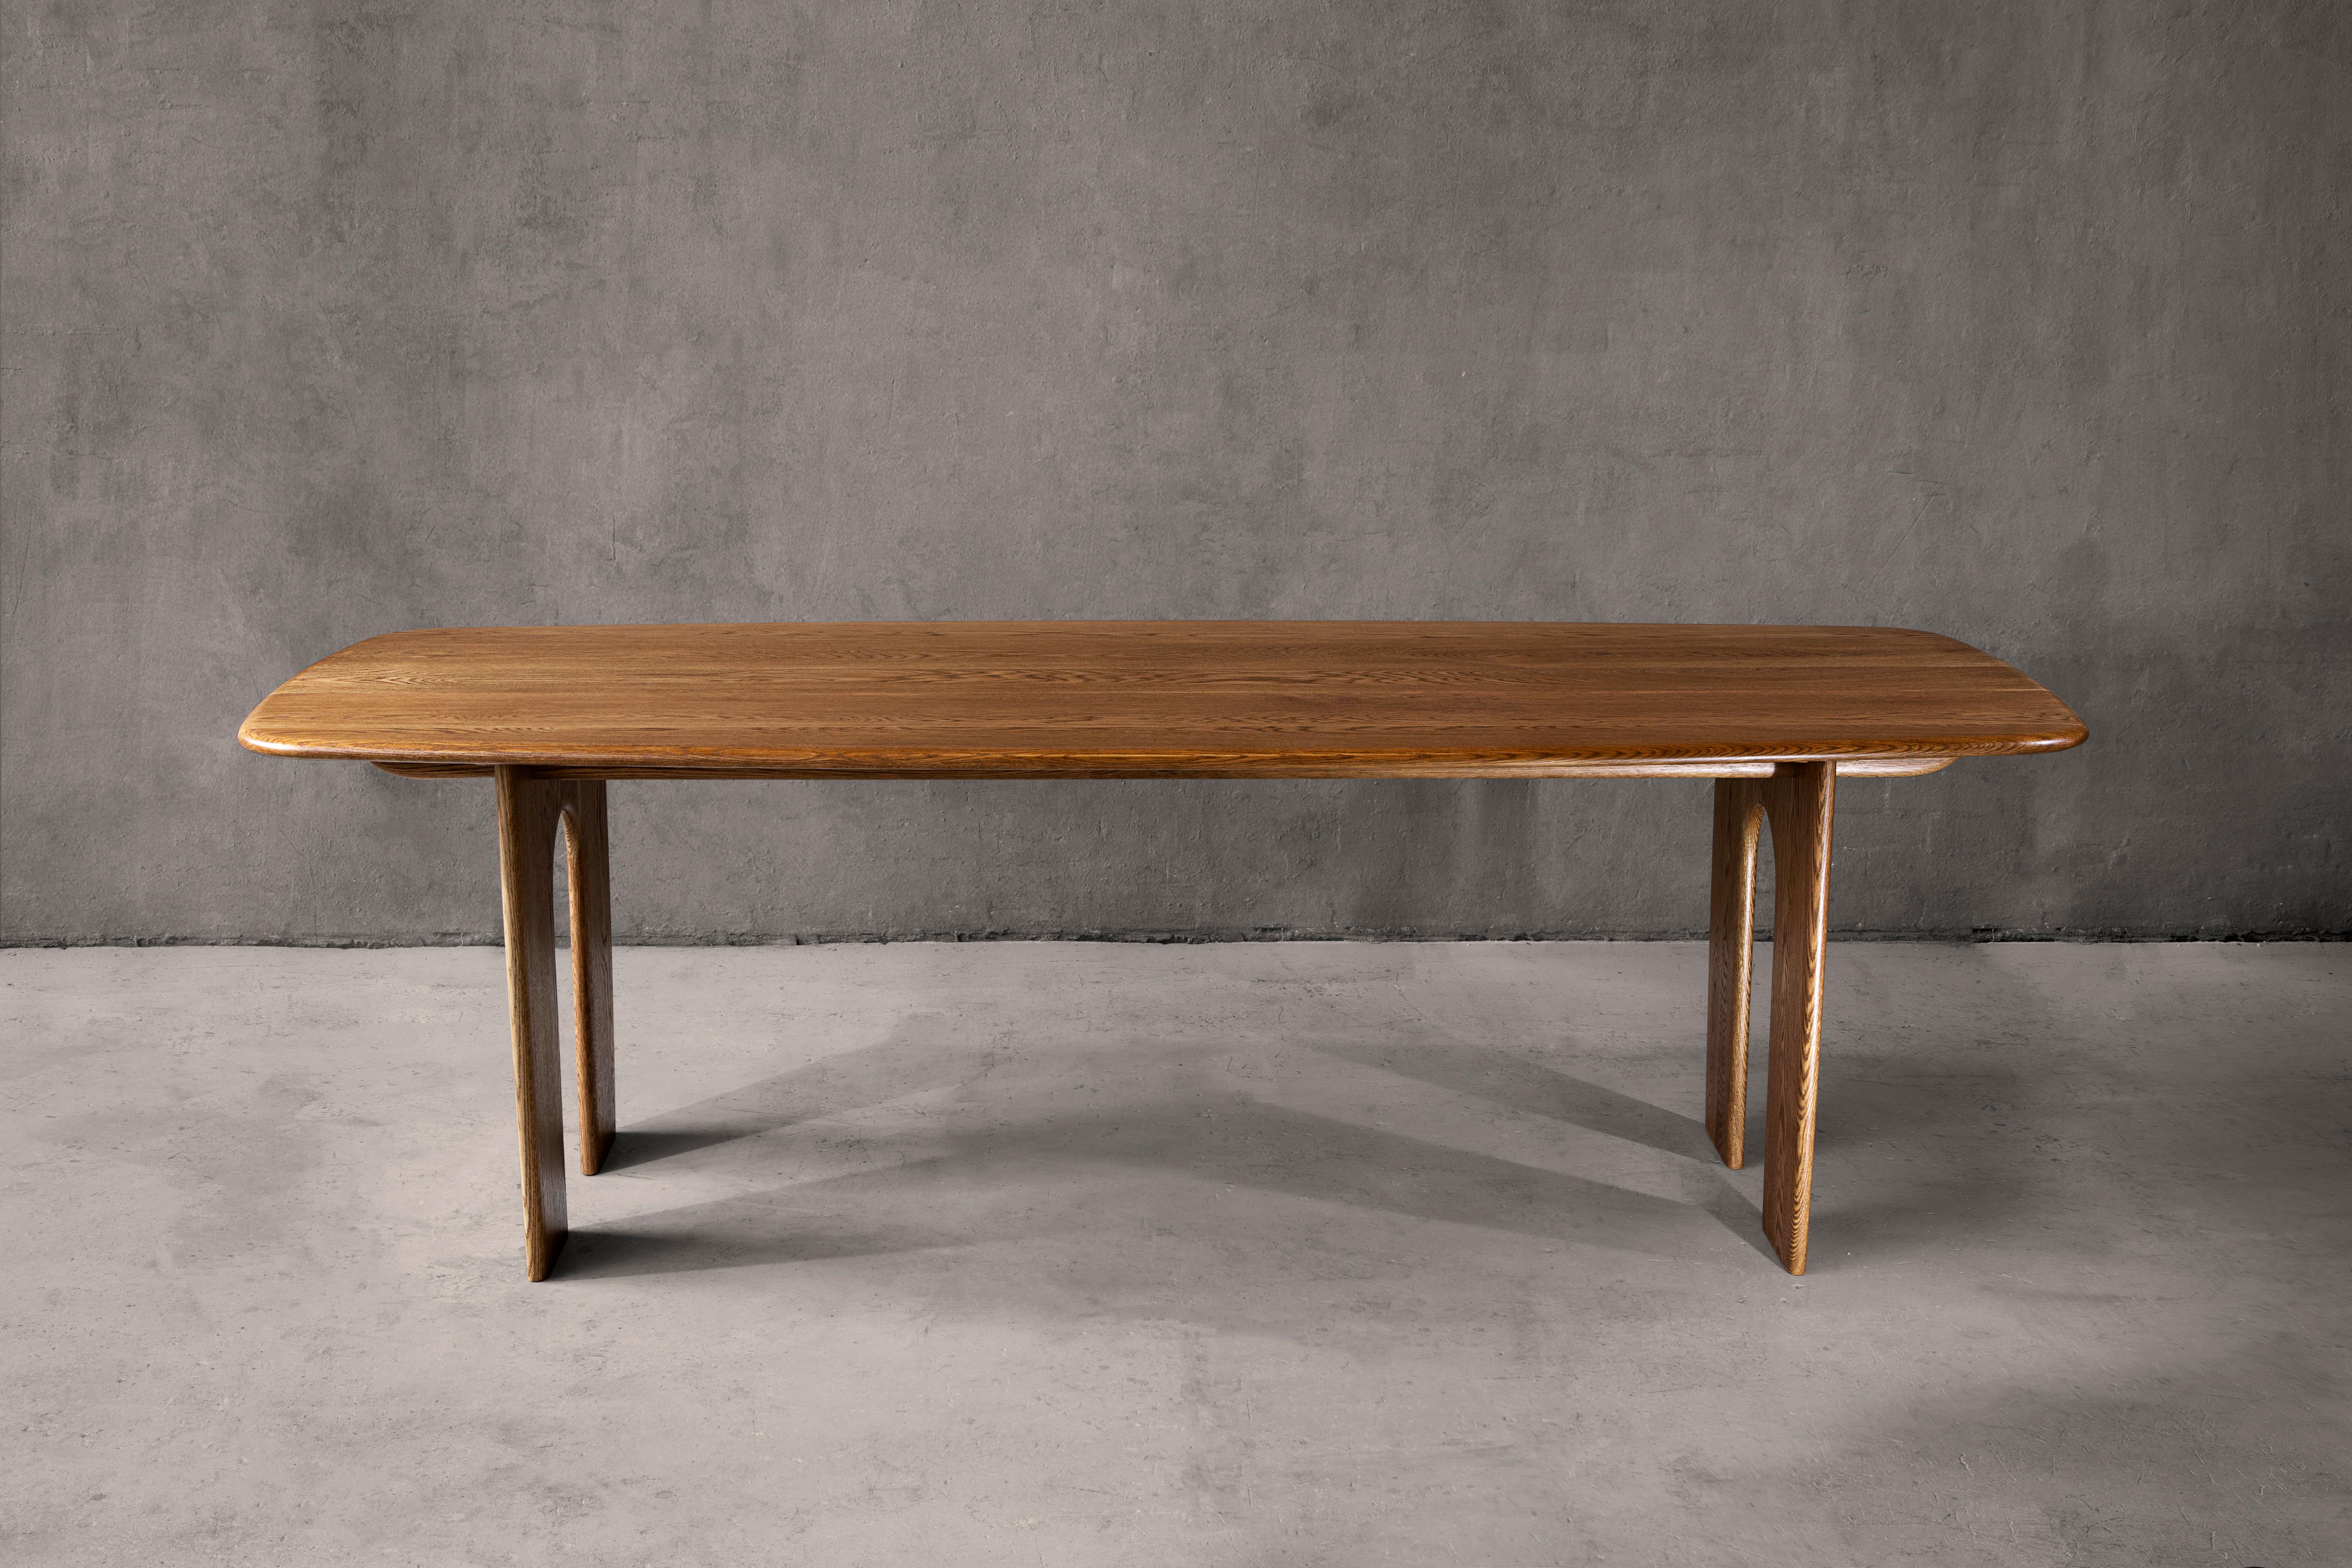 Inspired by the fishing boats traditionally used on the North East English coast. A made-to-order dining table designed by Lind + Almond and handcrafted in the UK.

Constructed from the finest American oak with pronounced grain and hand polished to